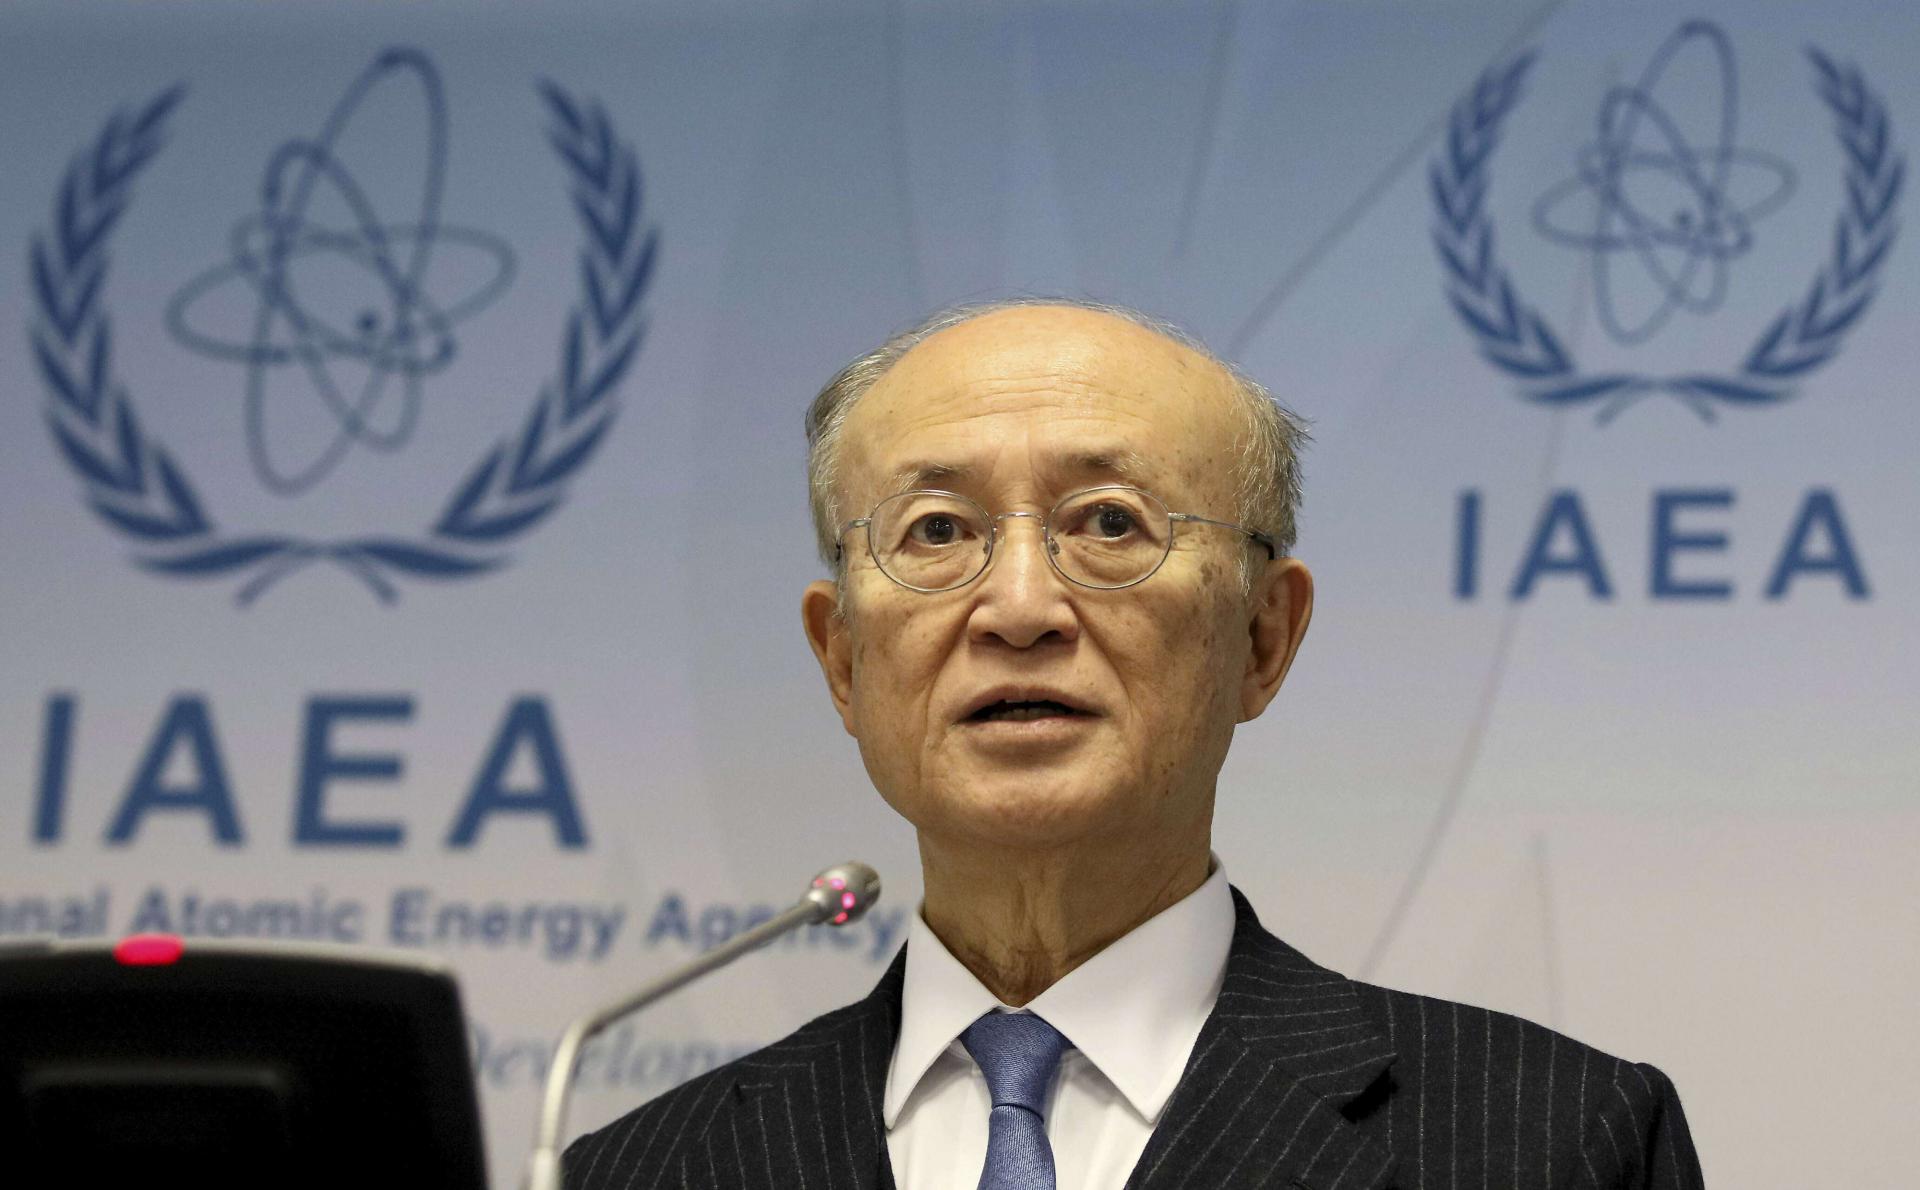 Amano took over from Egypt's Mohamed ElBaradei in 2009